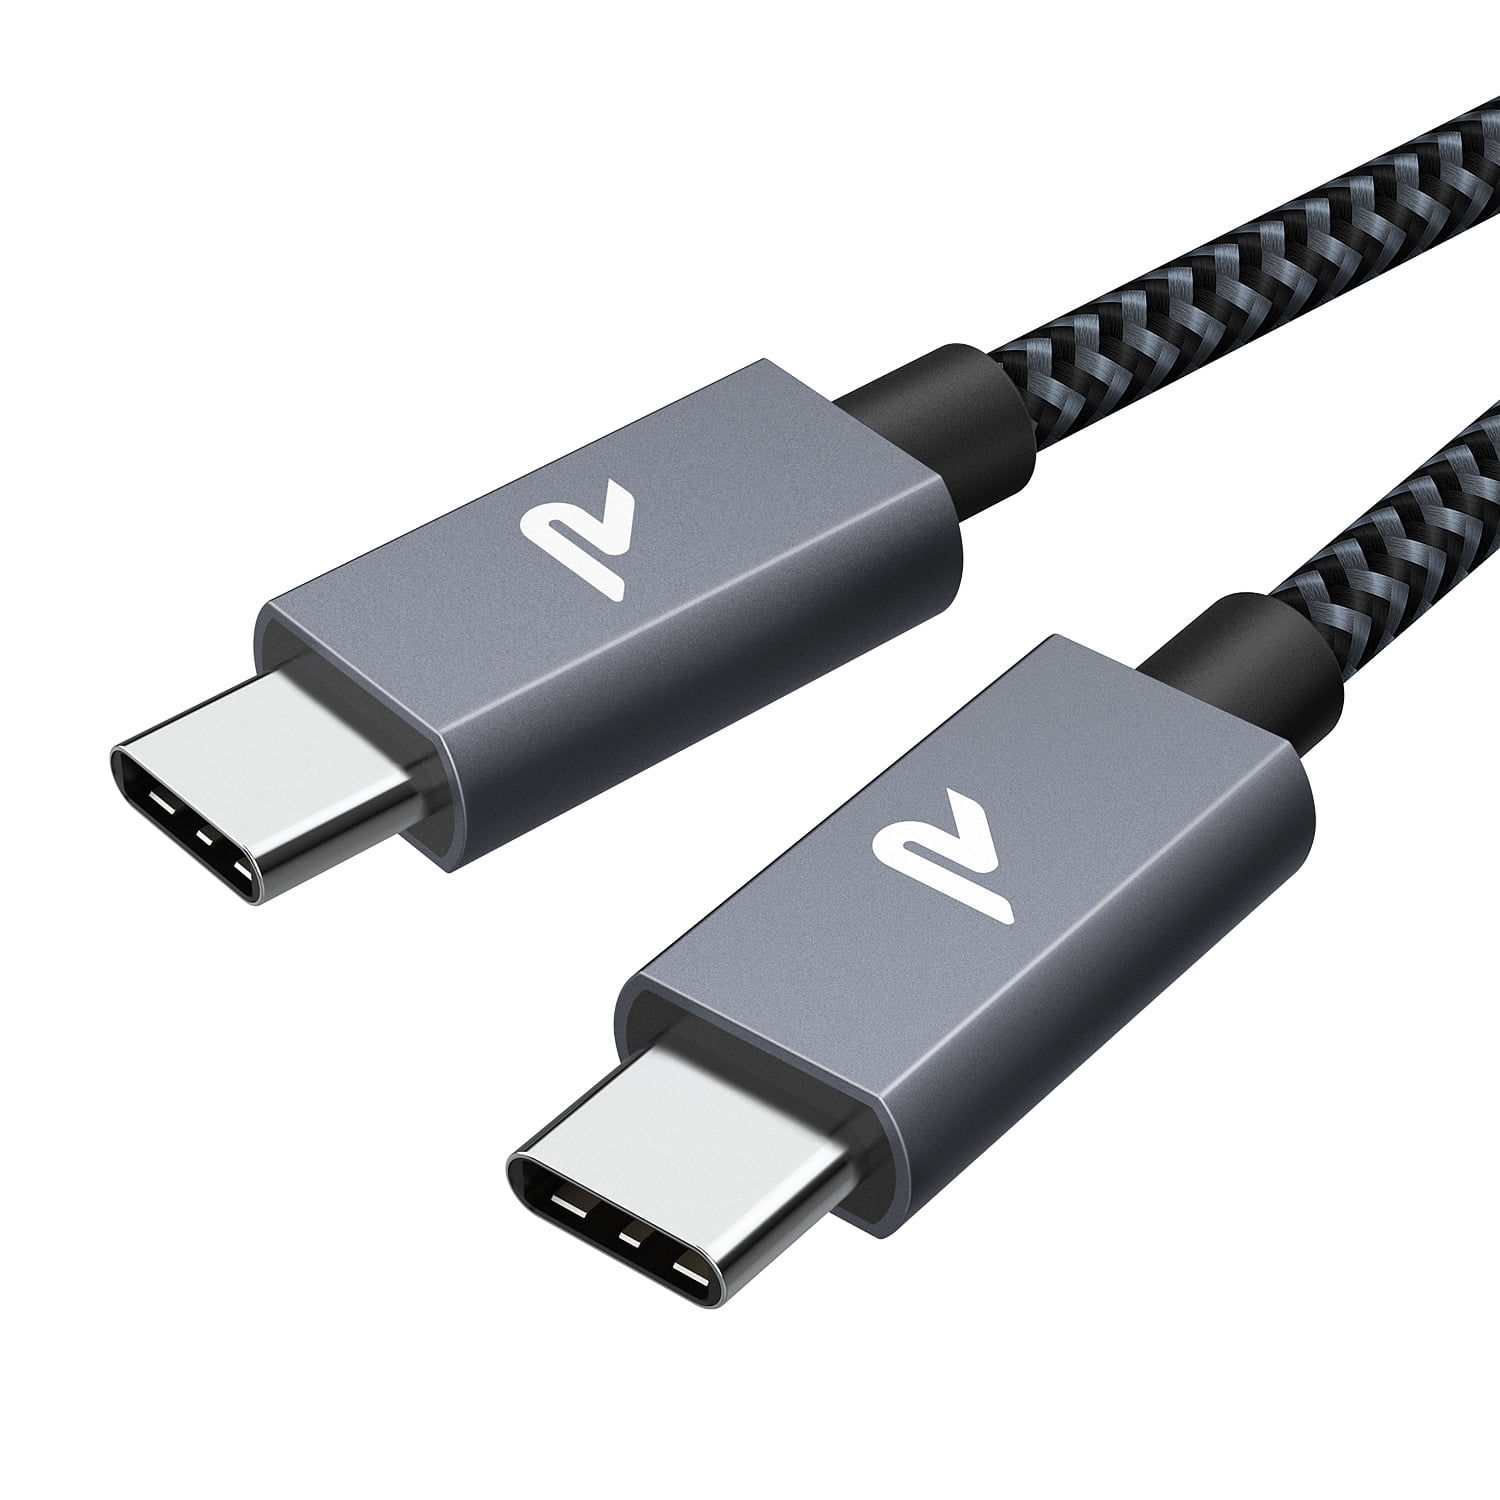 USB3C-1M, USB 3.1 Cable - Type C Male to USB 3.0 Type A Male, 5-Gbps, 1-m -  Black Box